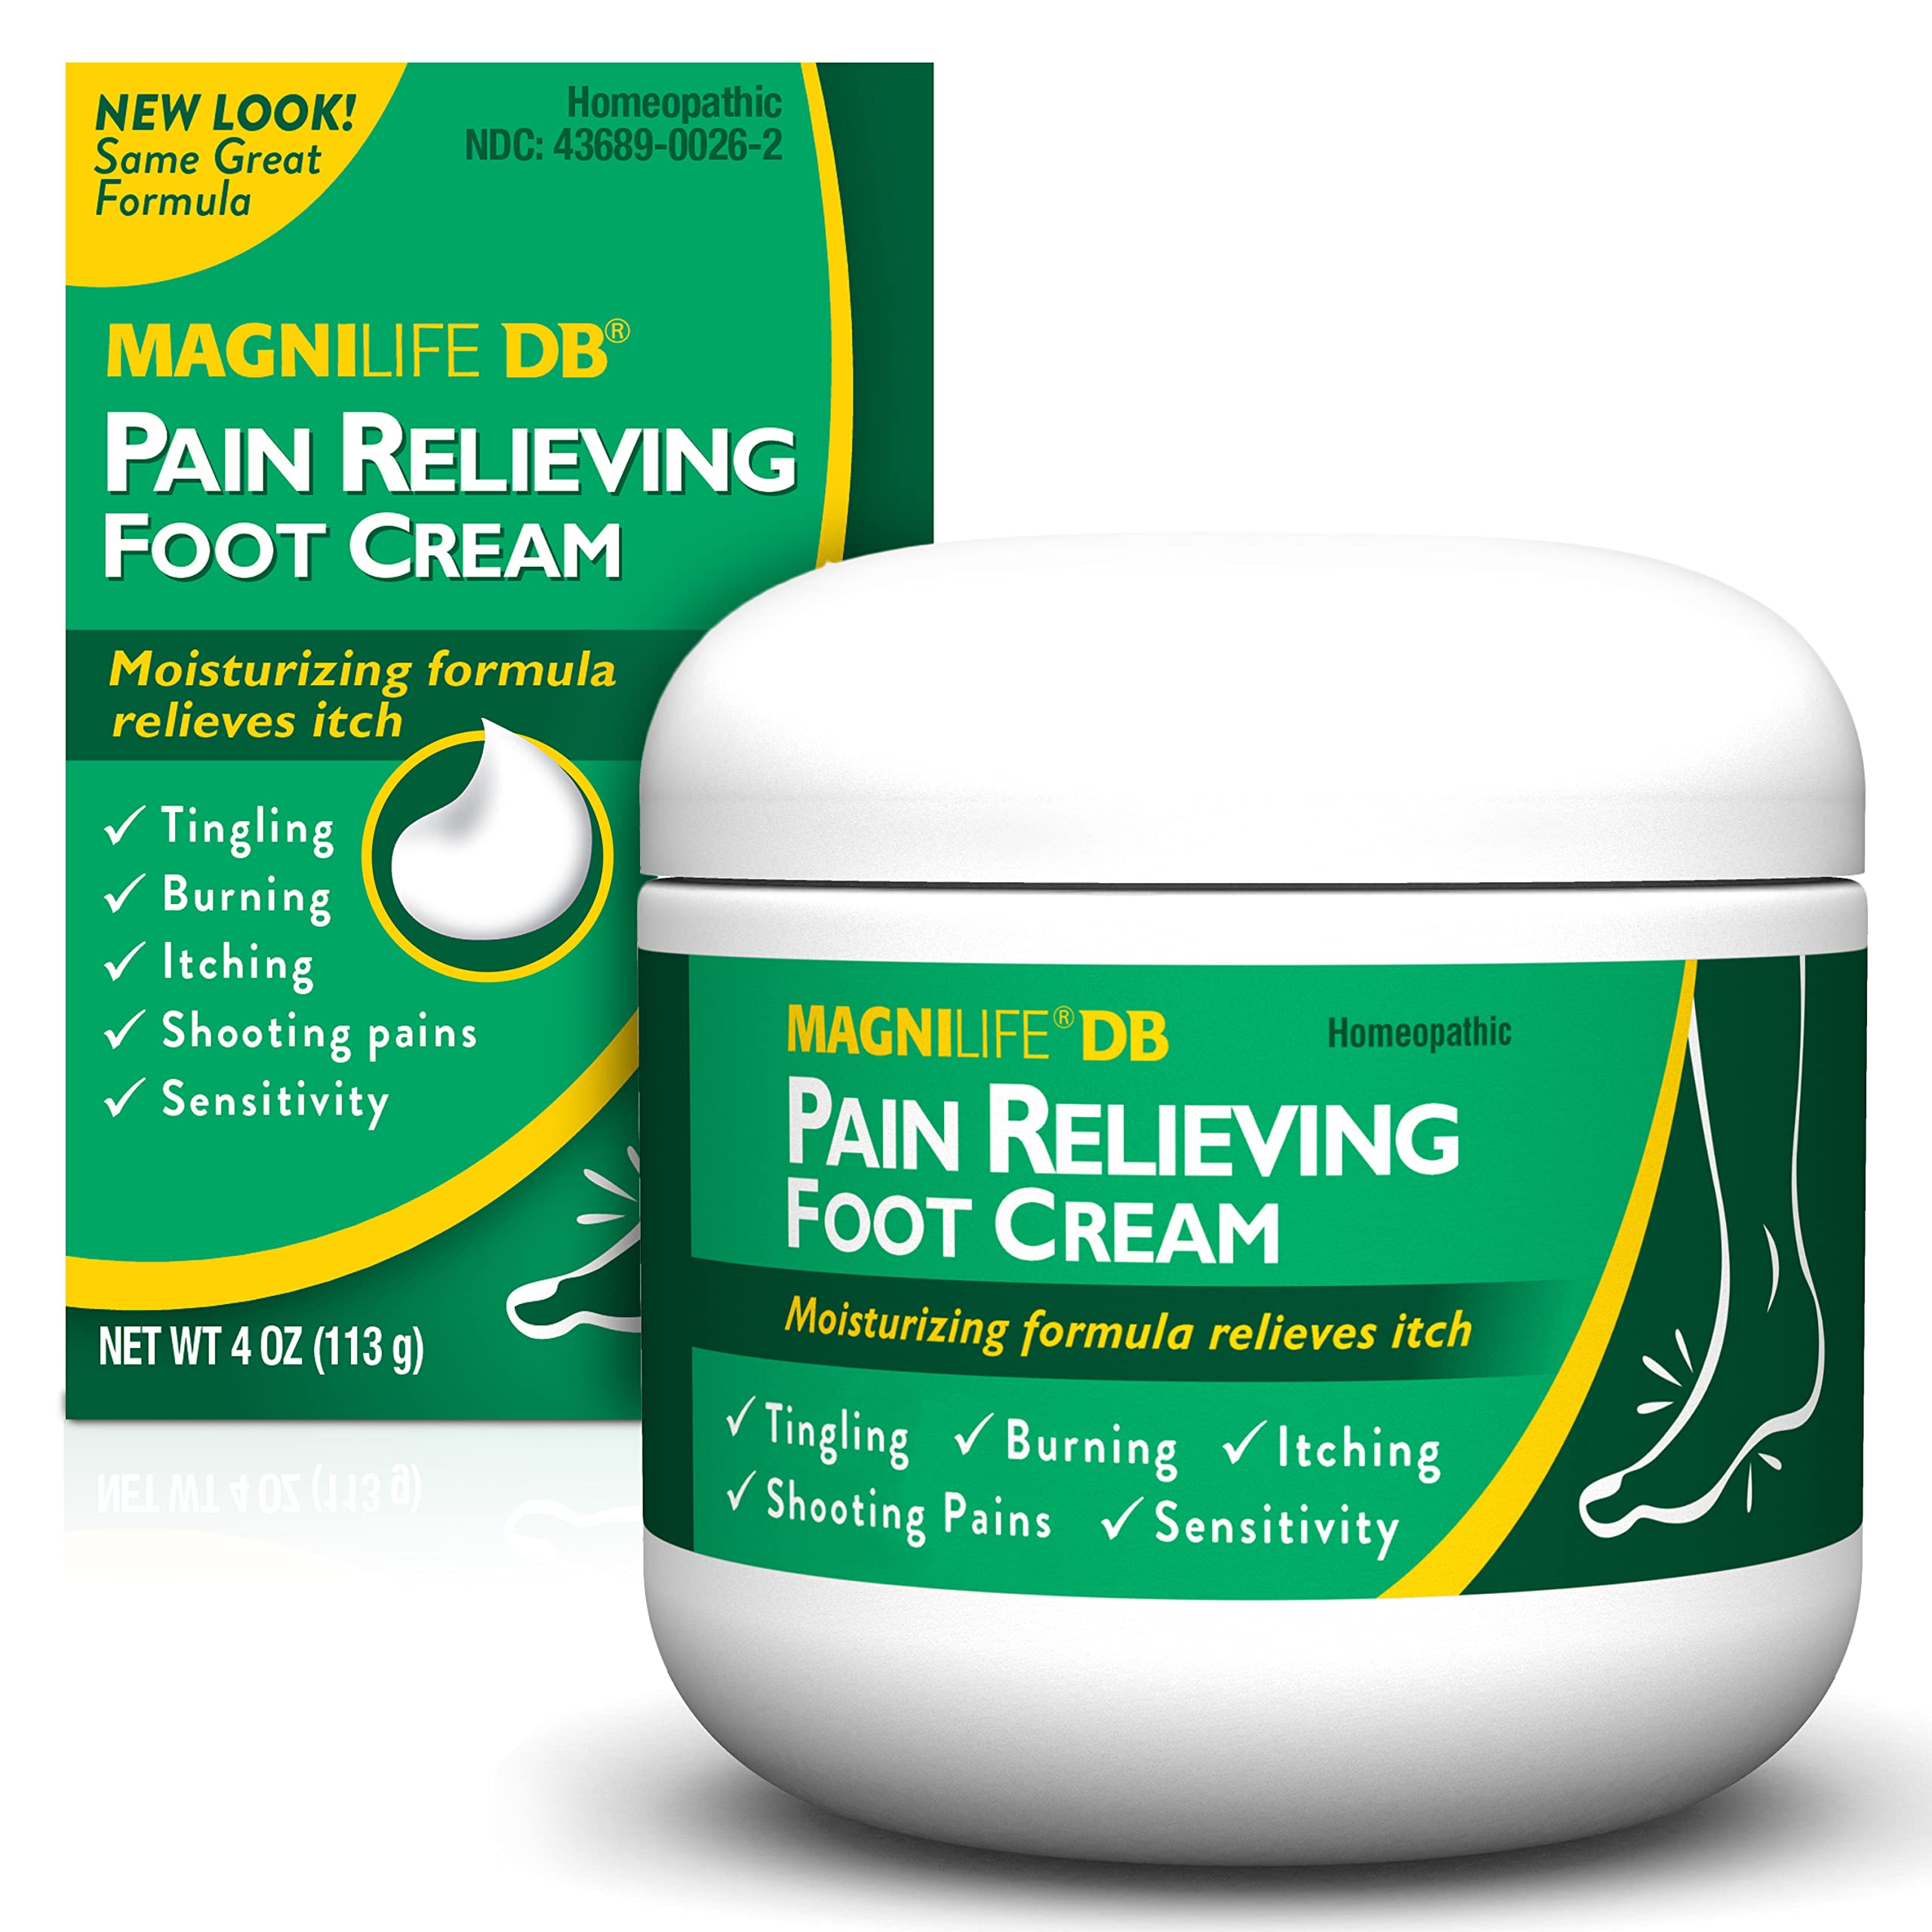 MagniLife DB Pain Relieving Foot Cream, Calming Relief for Burning, Tingling, Shooting & Stabbing Foot Pain, Moisturizing Foot Cream Suitable for Diabetic and Sensitive Skin - 4oz